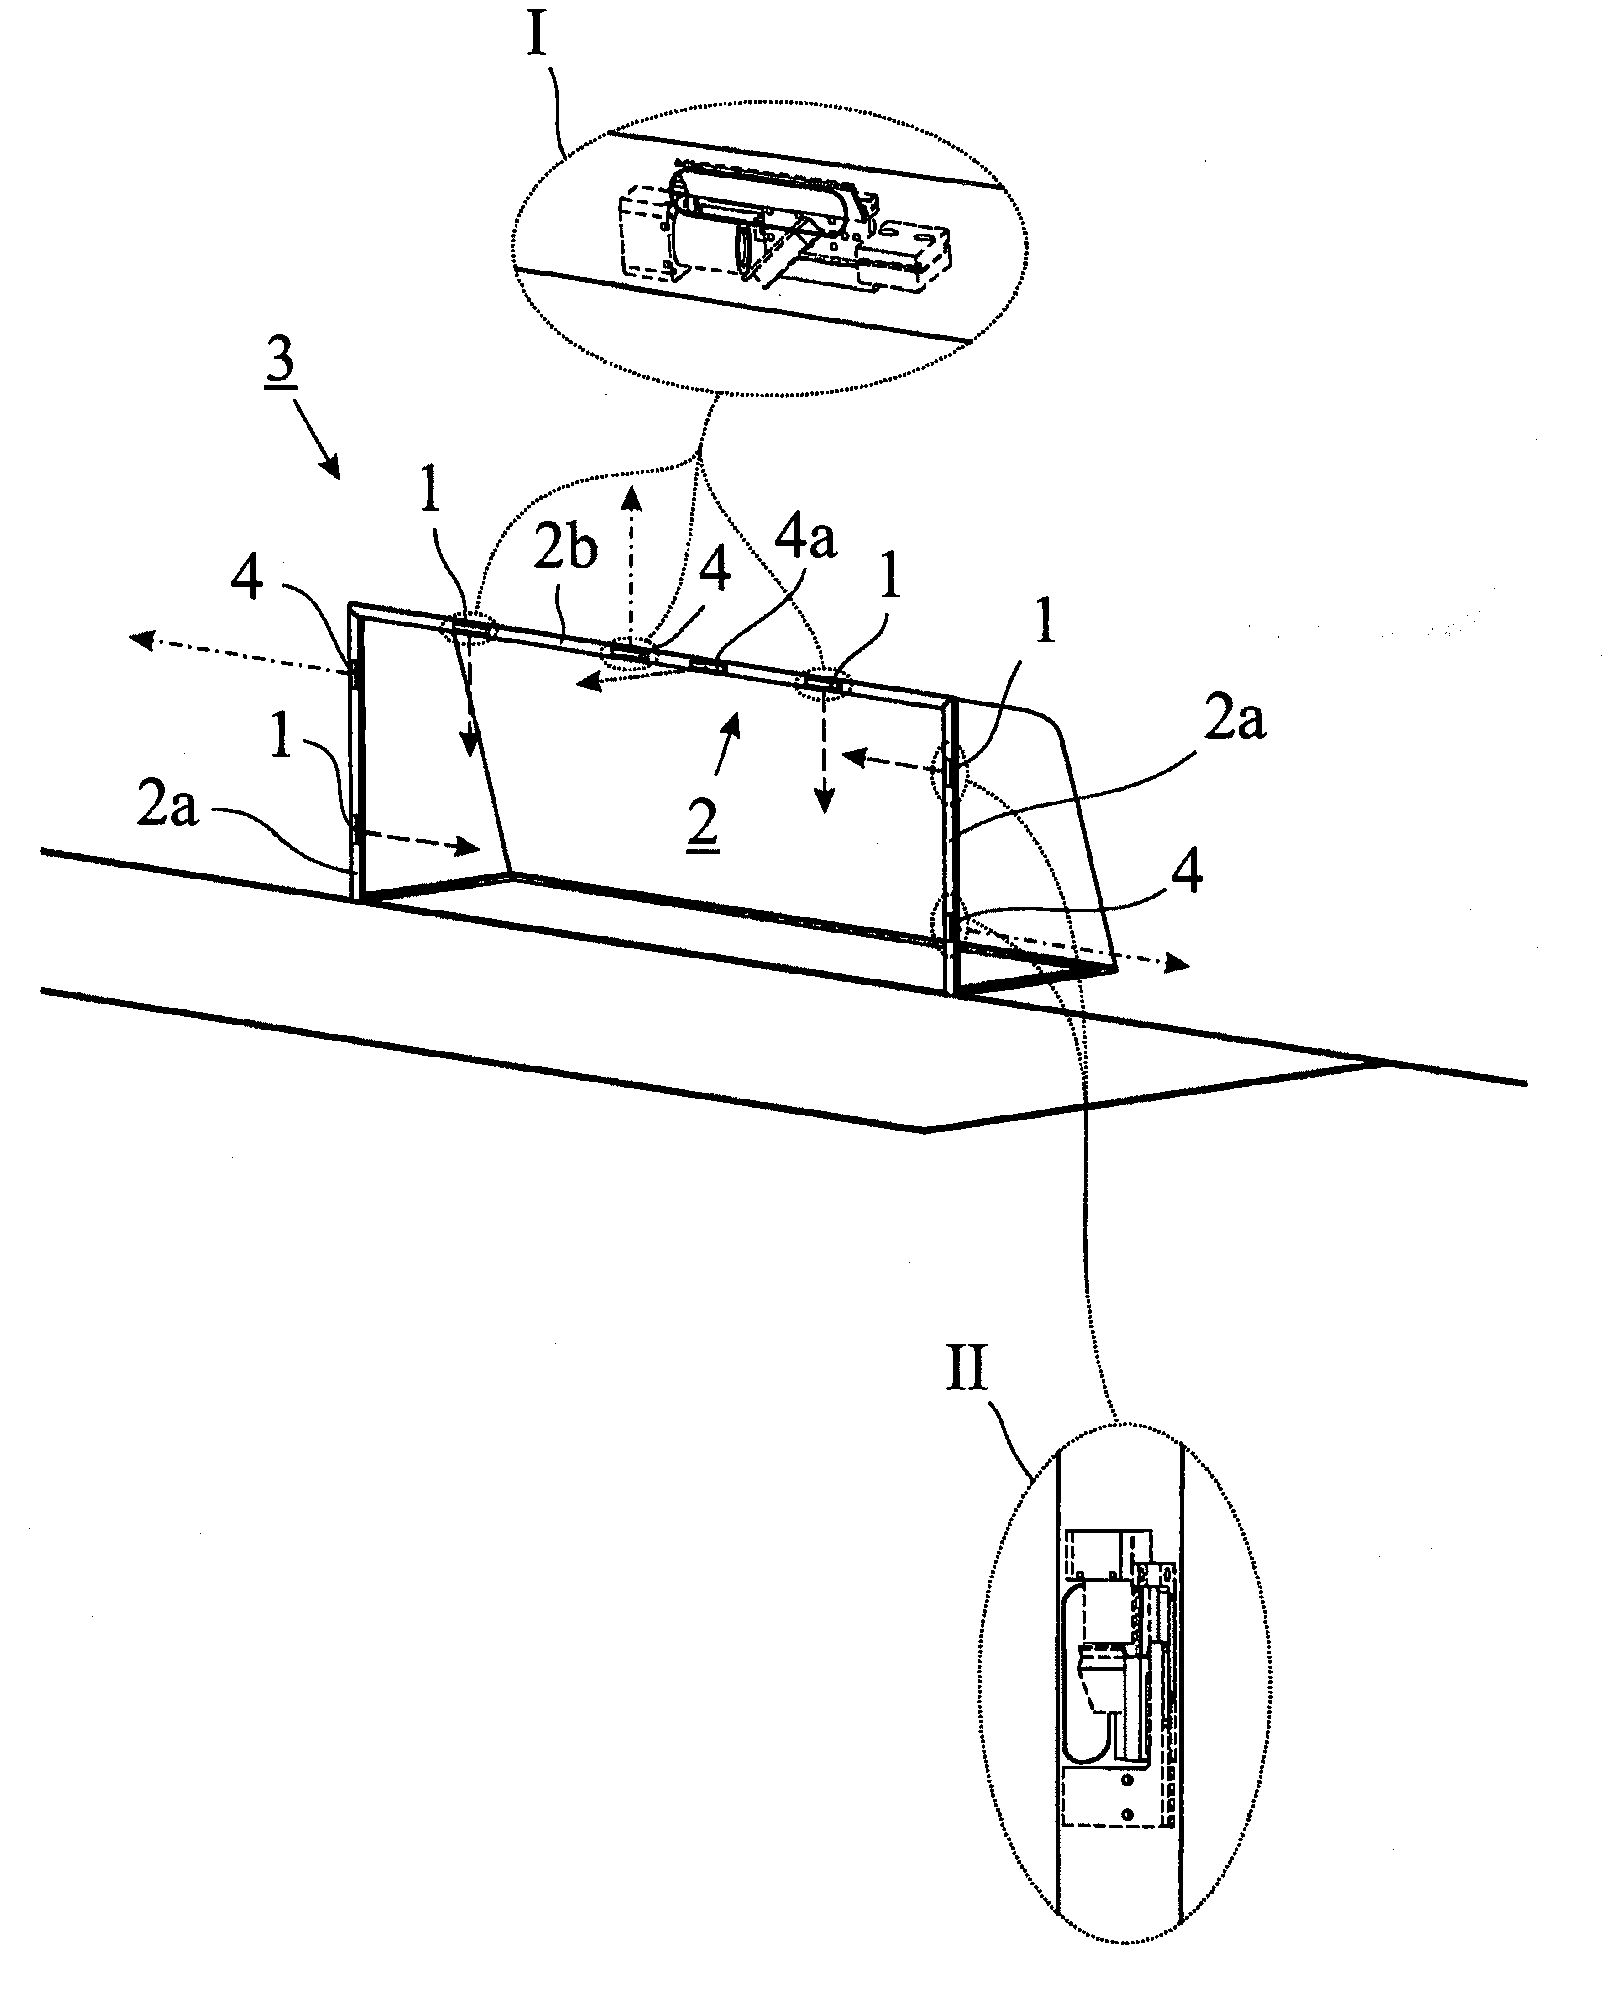 Goal recognition system and method for recognizing a goal